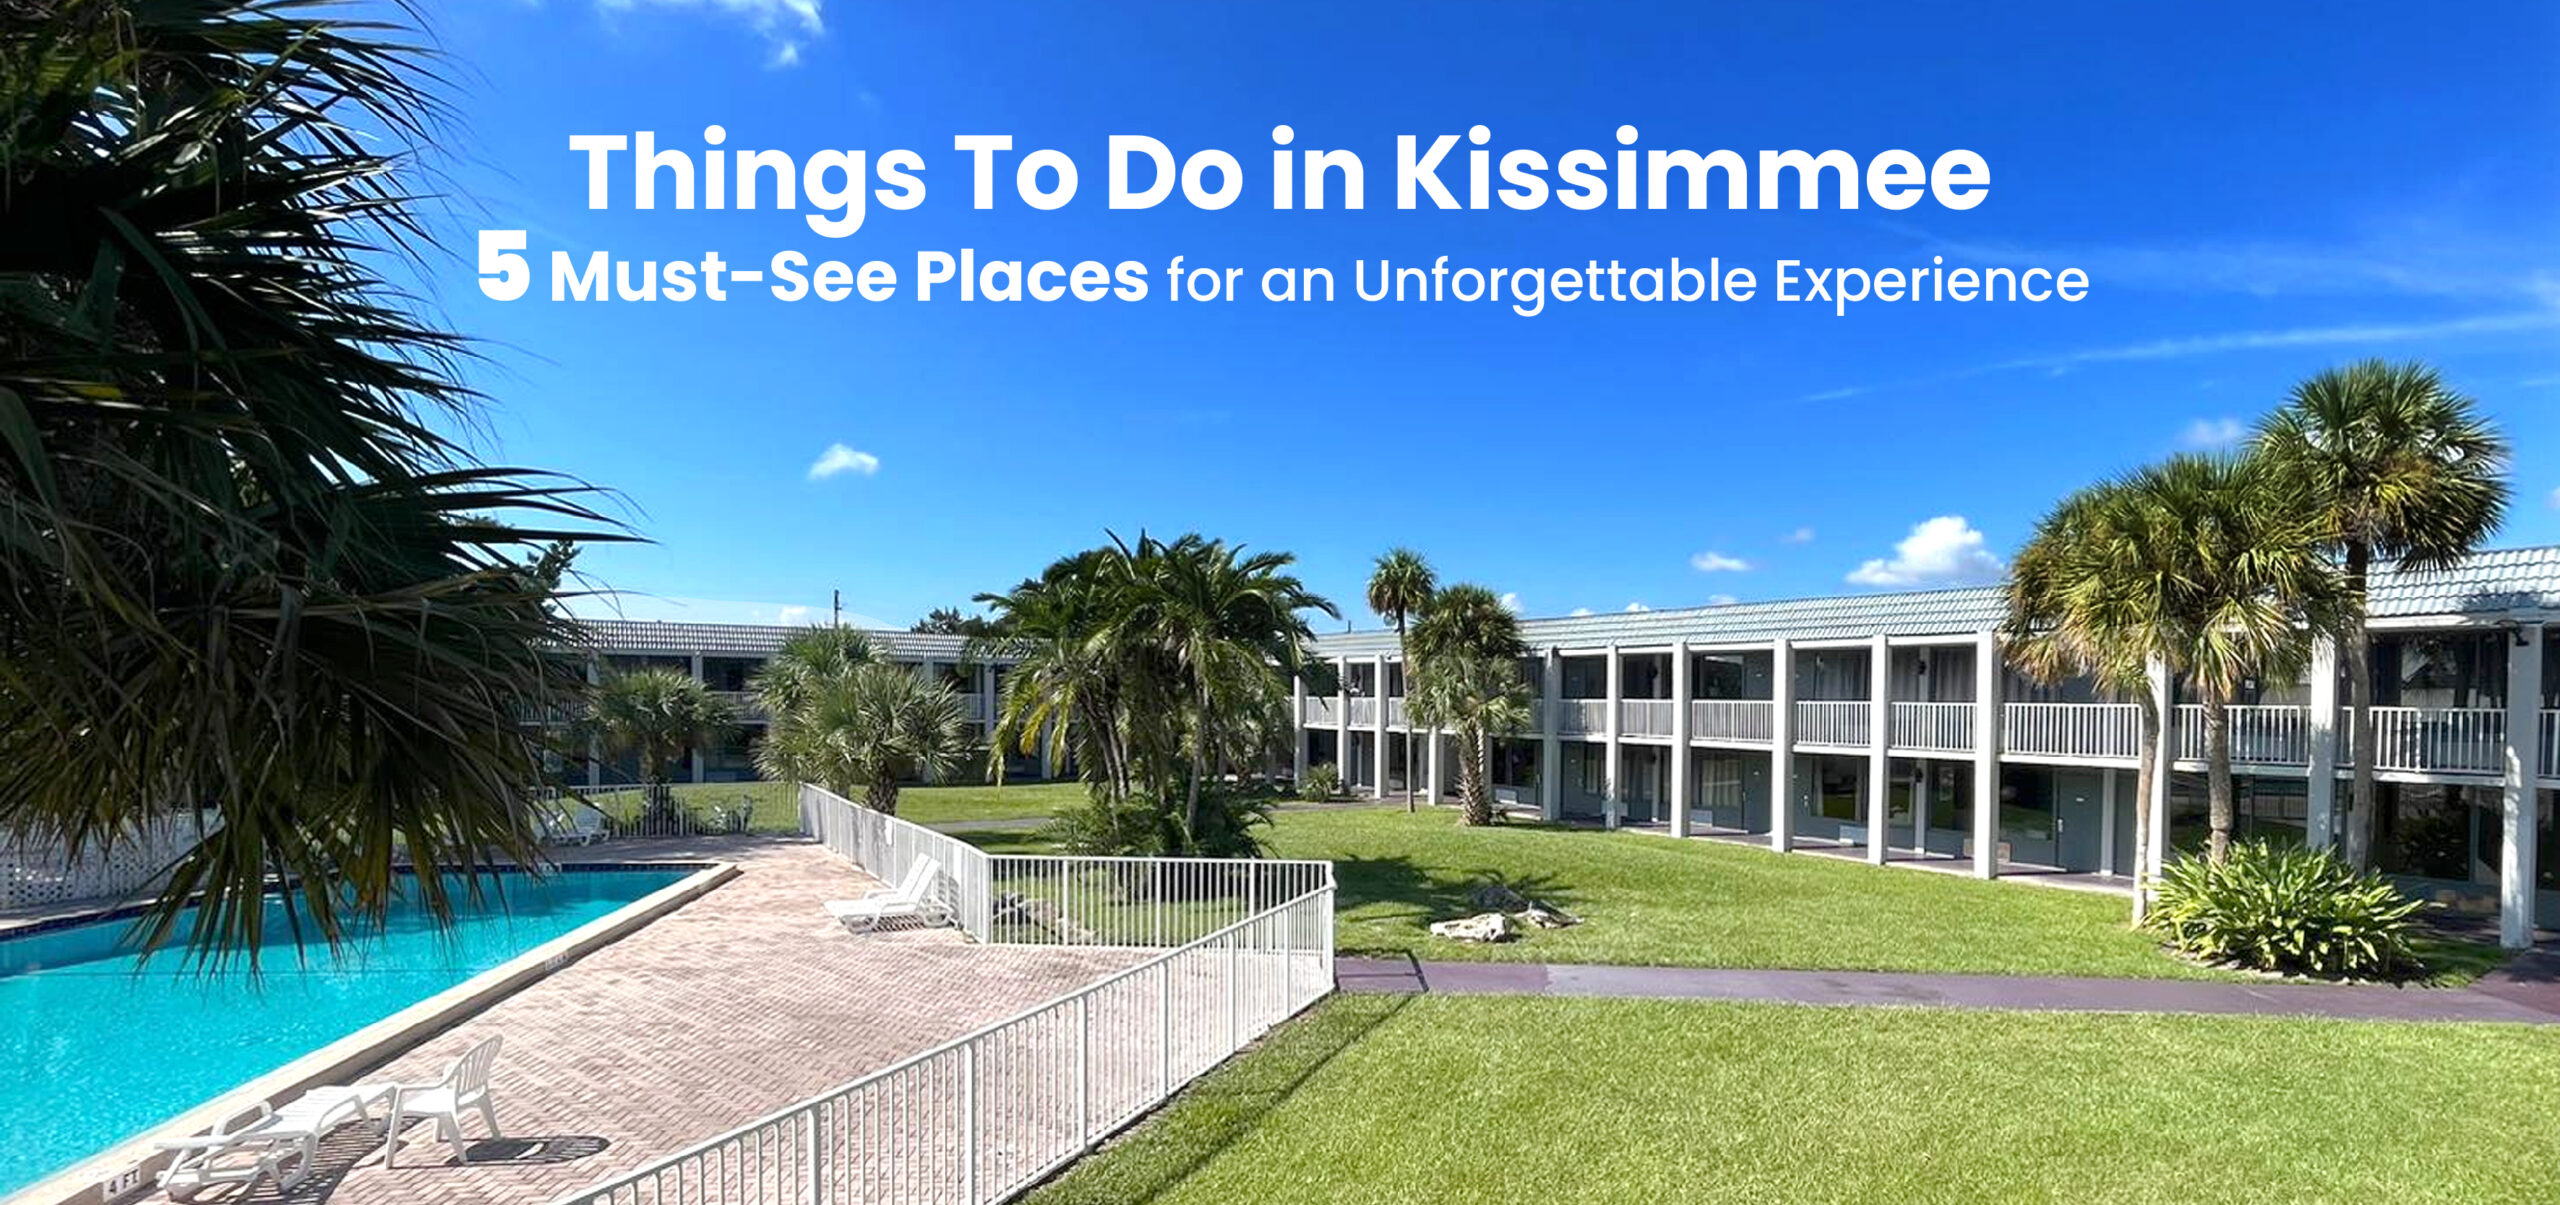 Things To Do in Kissimmee | 5 Must-See Places for an Unforgettable Experience